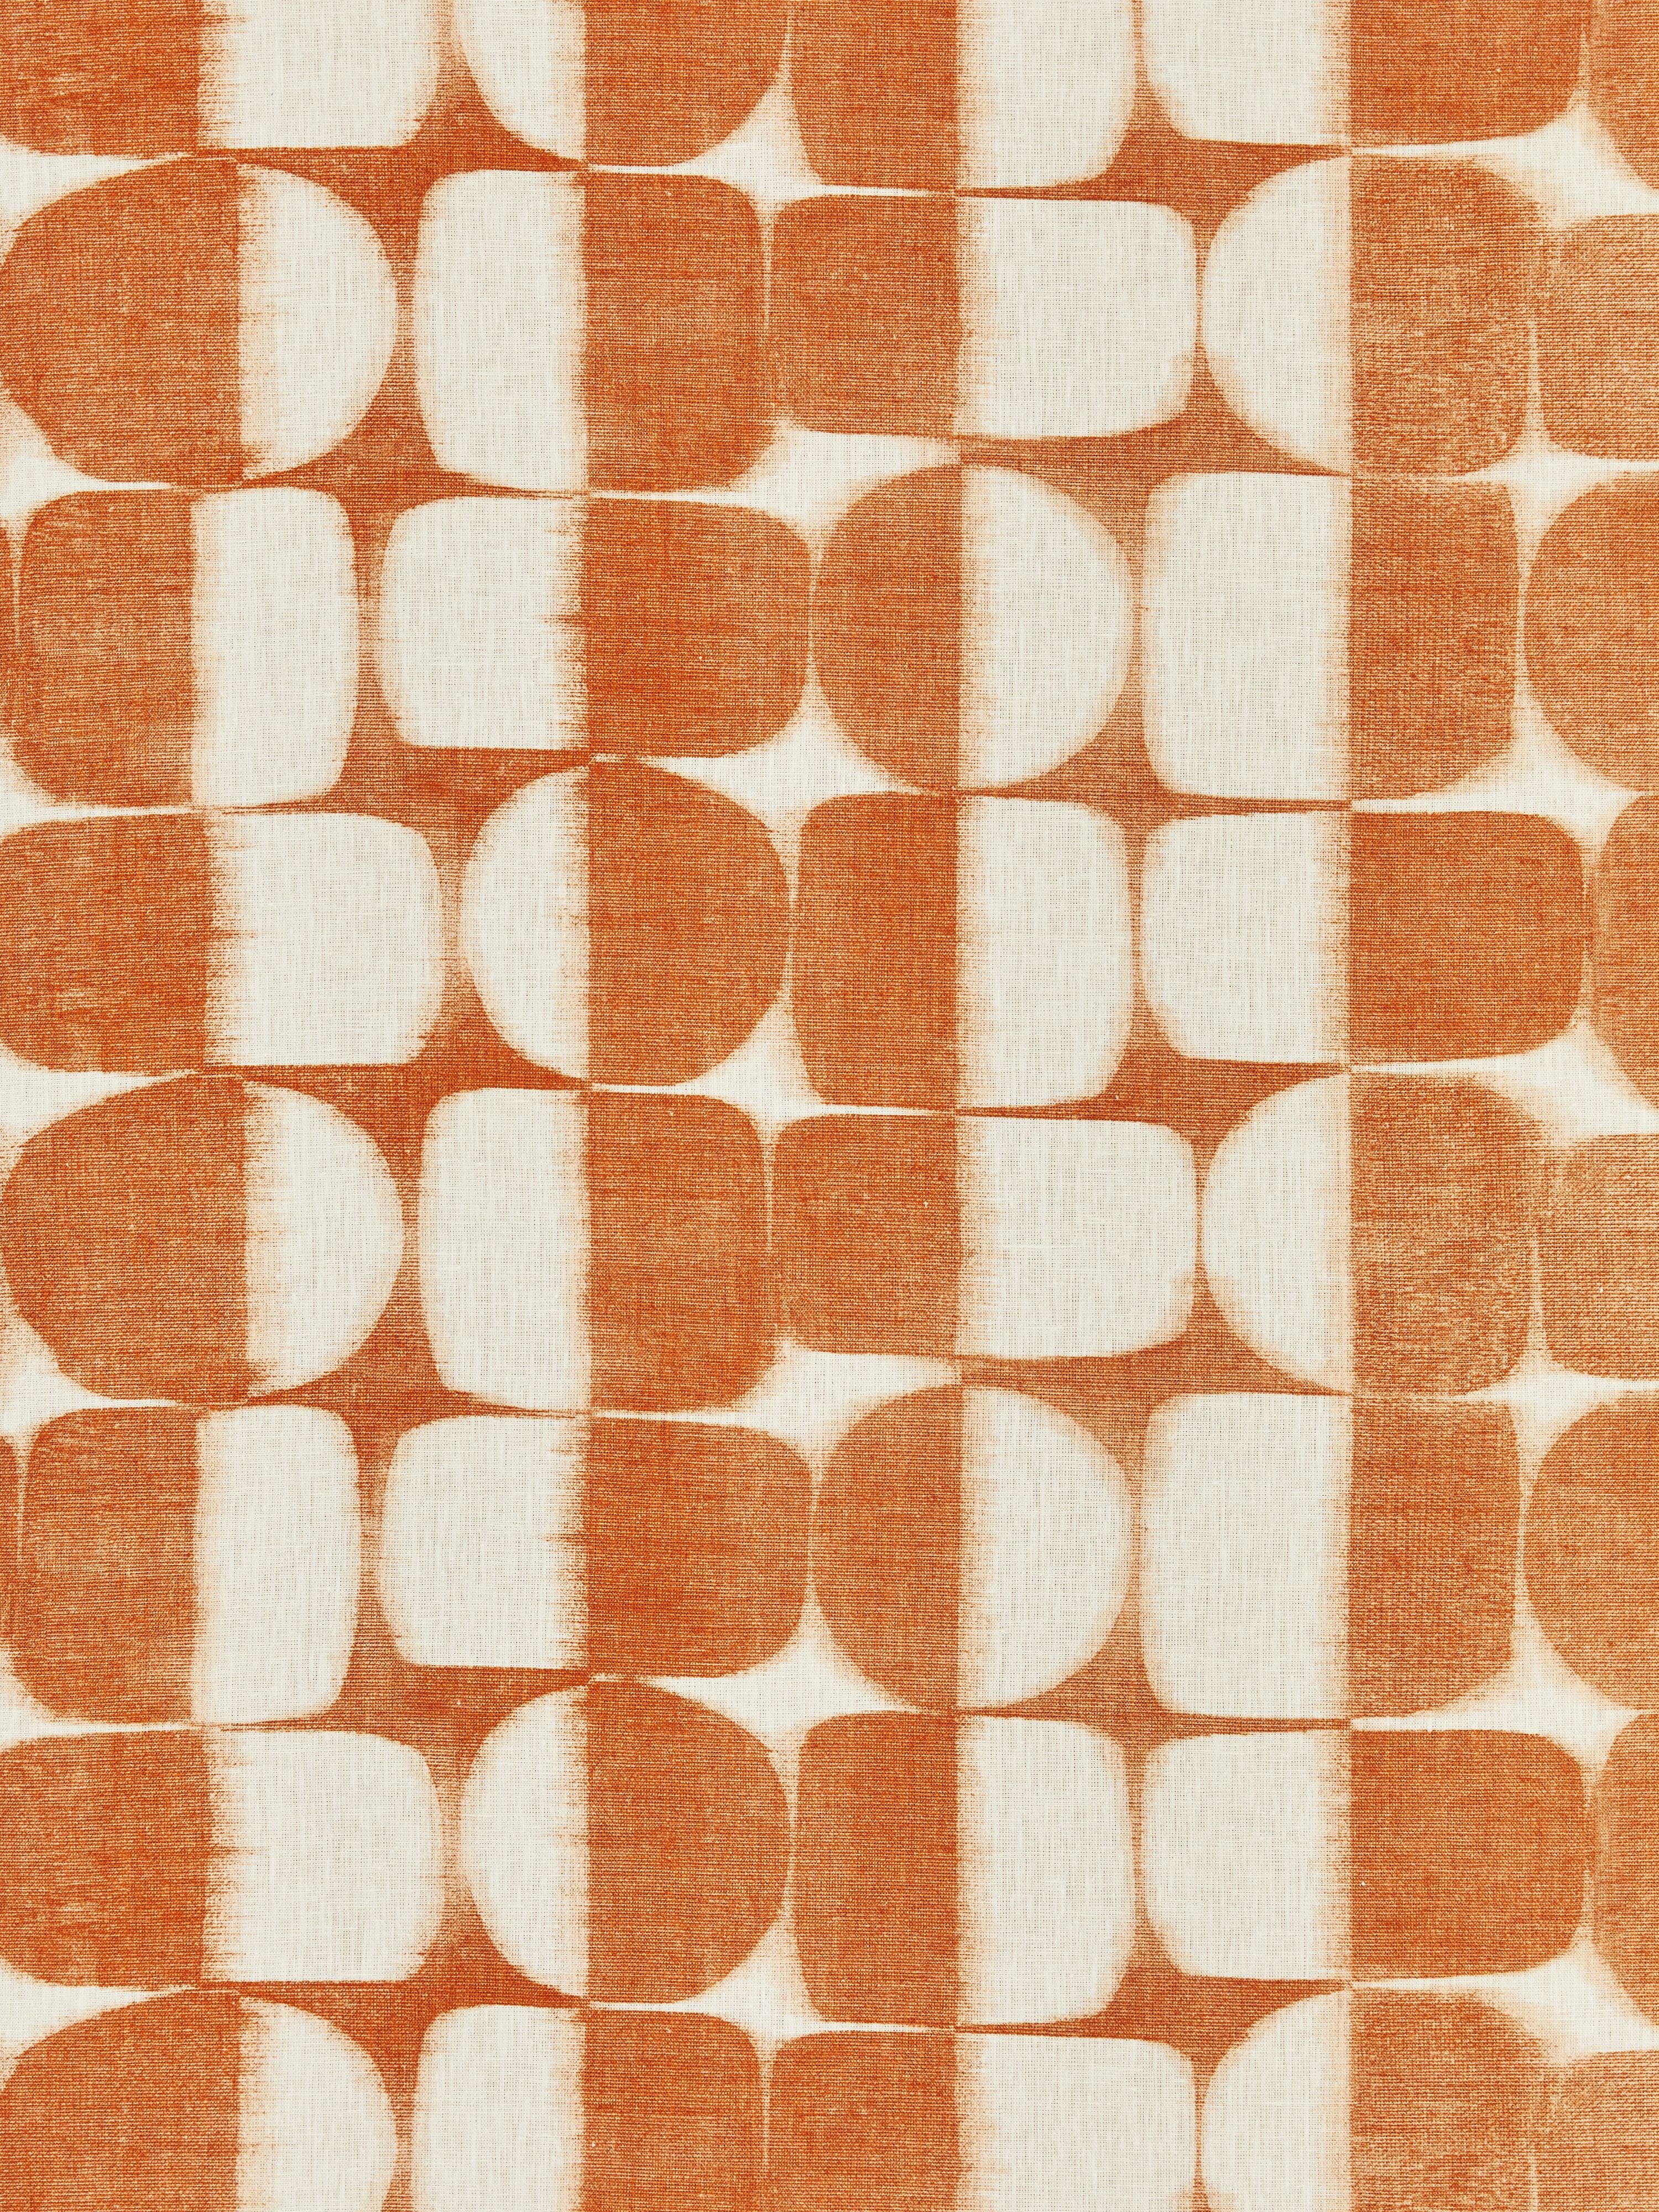 Rift Linen Print fabric in marigold color - pattern number SC 000216636 - by Scalamandre in the Scalamandre Fabrics Book 1 collection